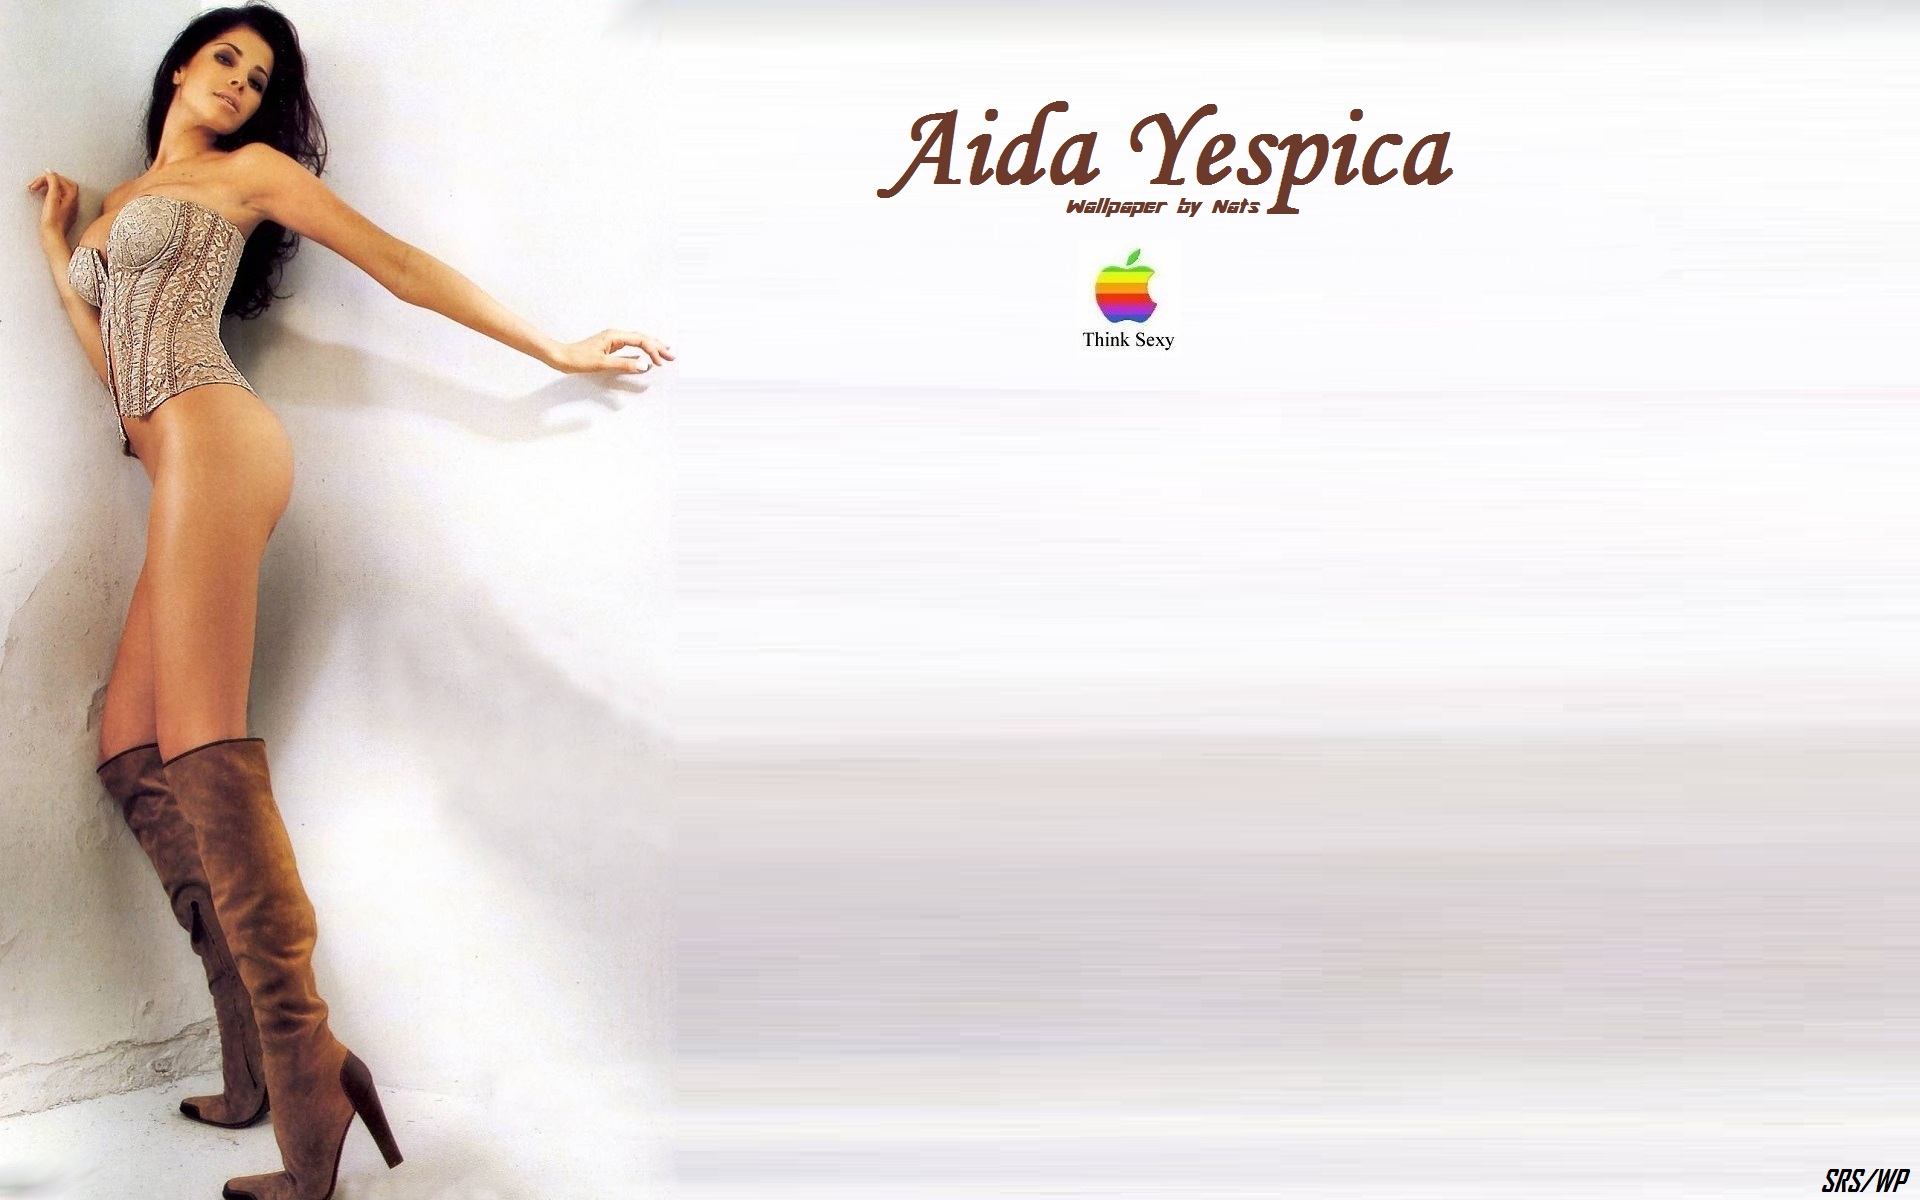 Download full size Aida Yespica wallpaper / Celebrities Female / 1920x1200